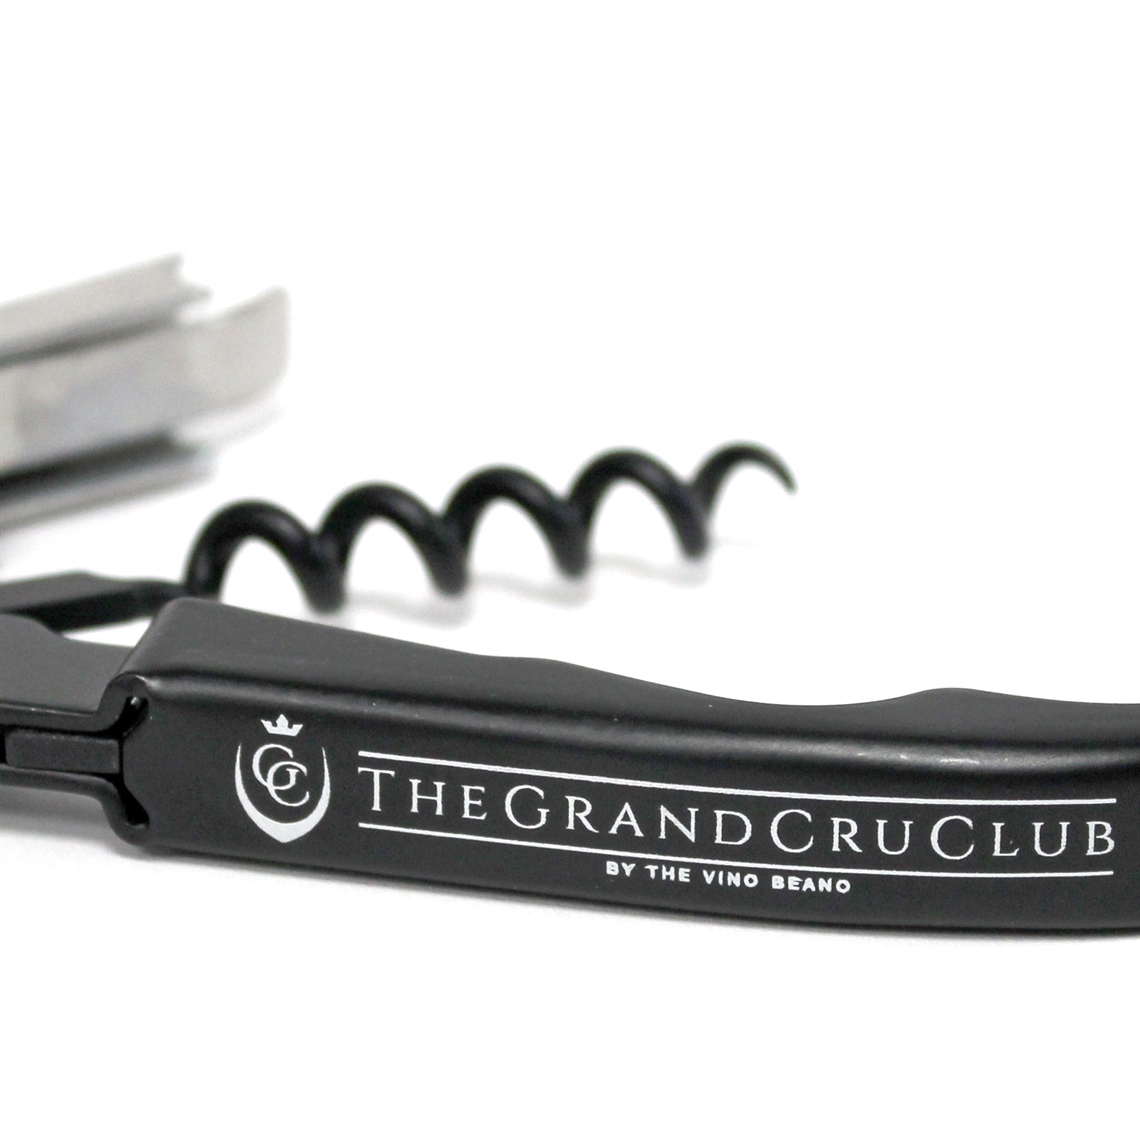 View more champagne sabre / openers from our Branded Corkscrews & Bottle Openers range